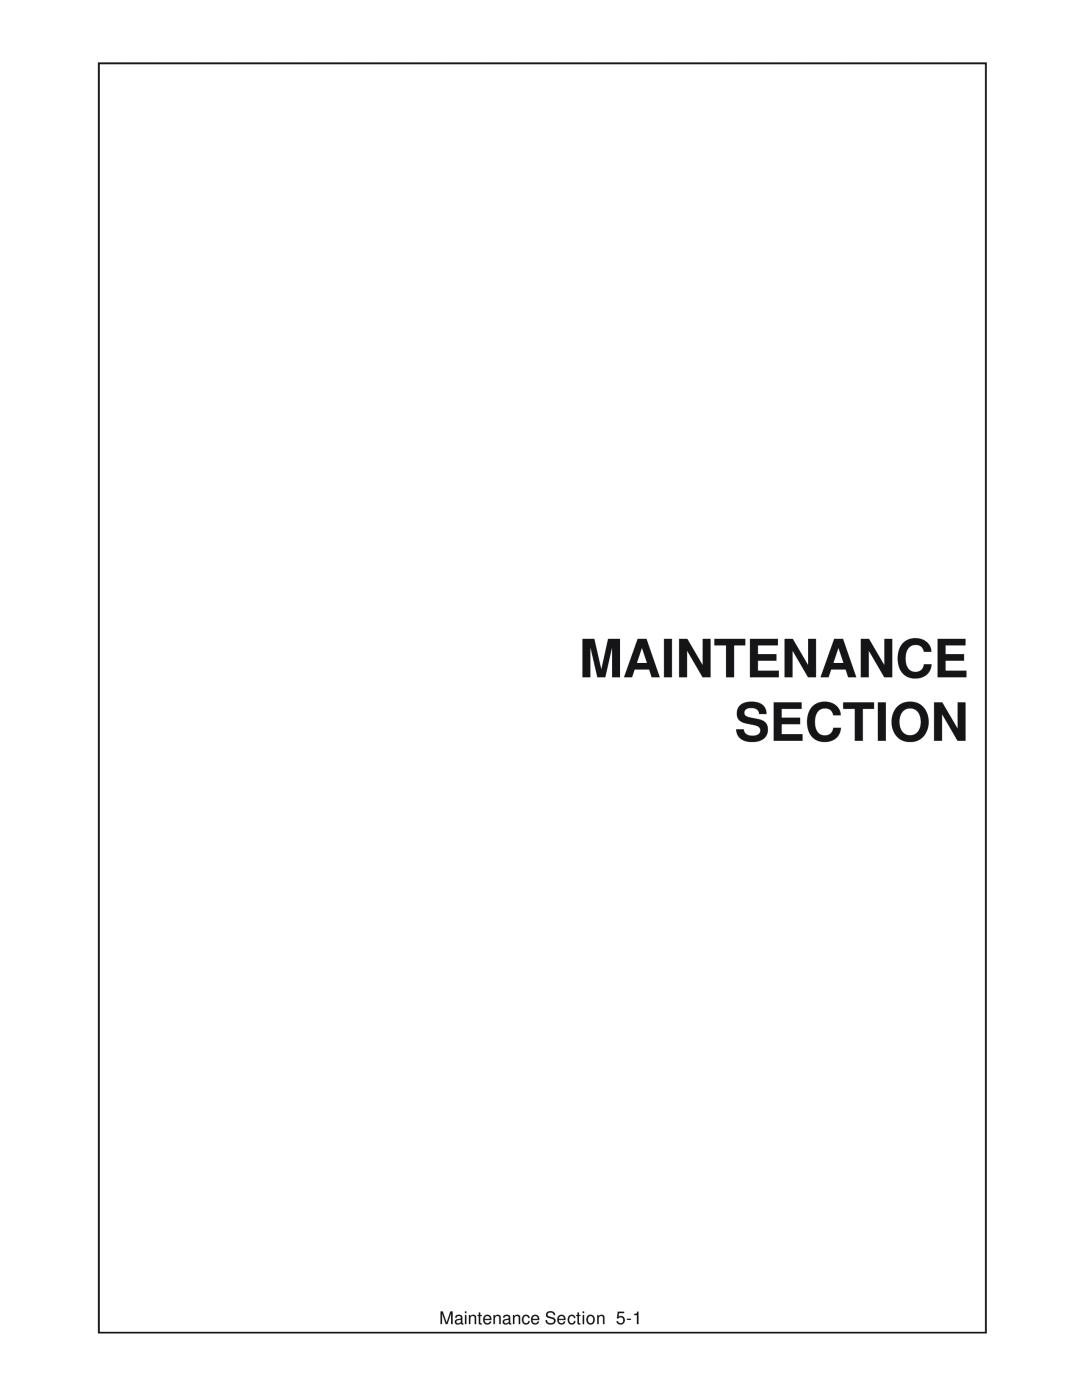 Grizzly 52 manual Maintenance Section 